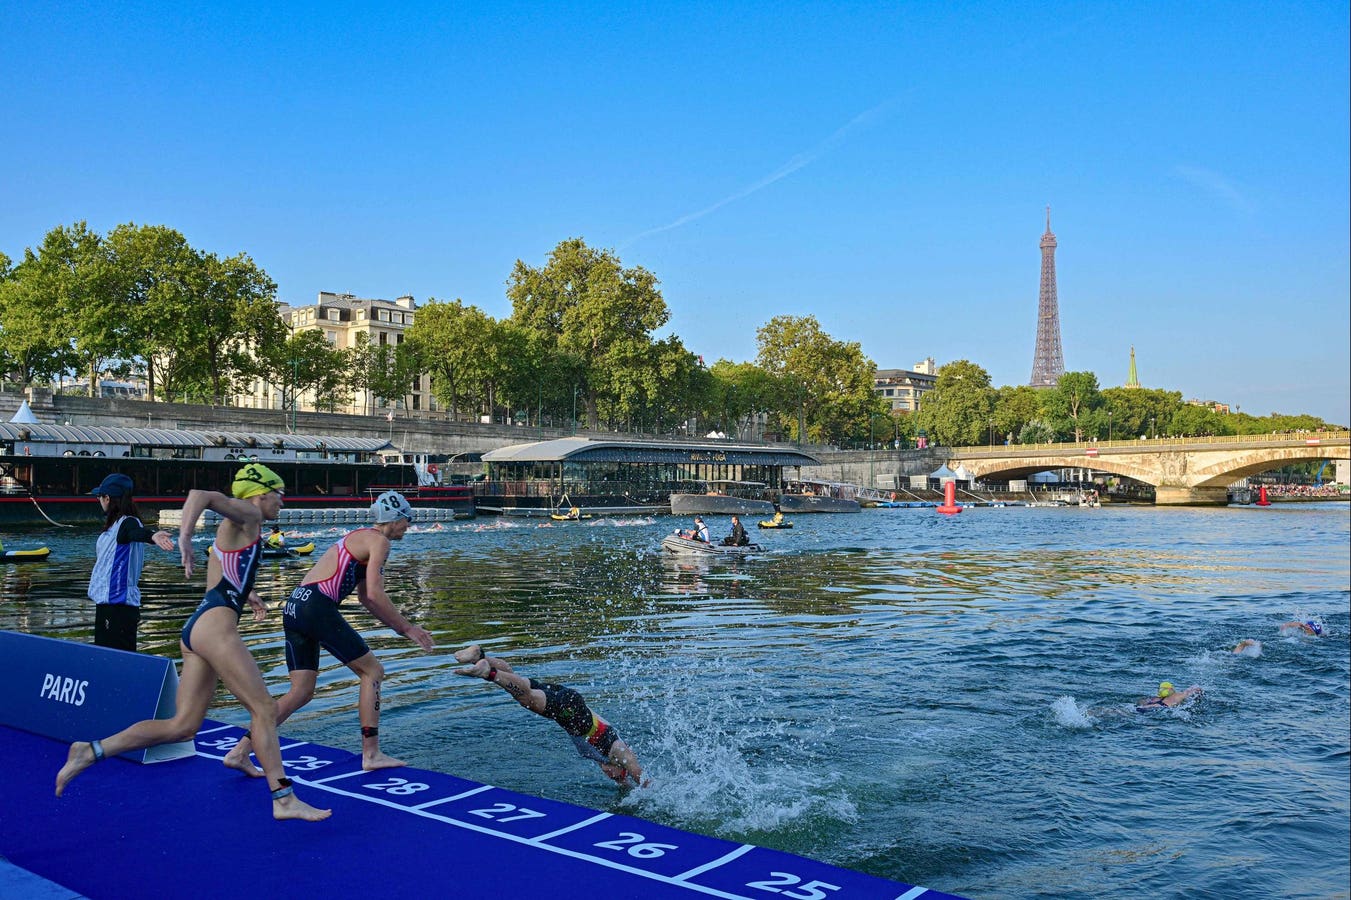 Swimming In The Seine Isn’t The Only Health Risk For Paris Olympians And Fans